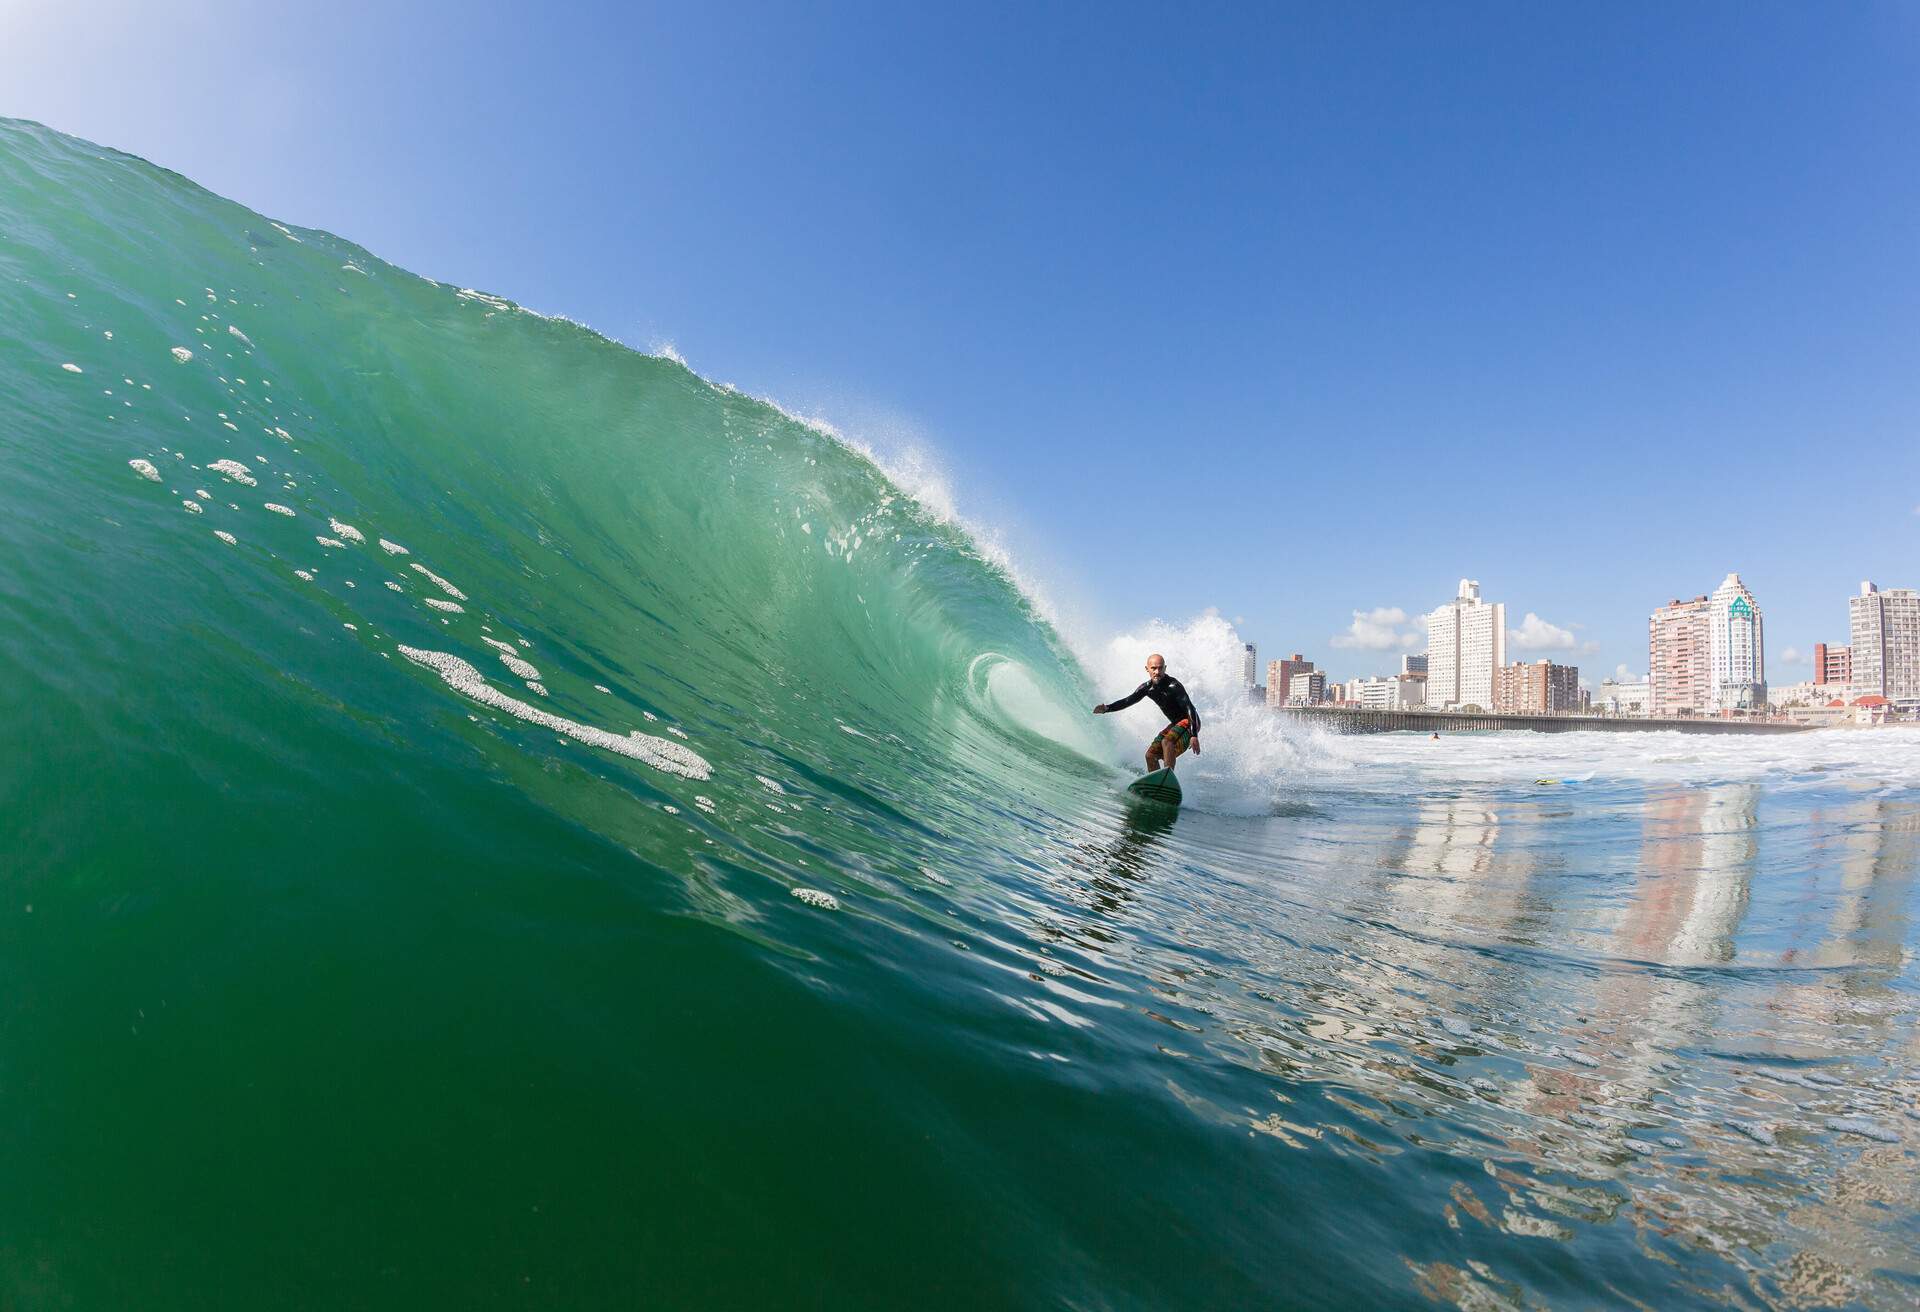 A surfer skillfully rides an ocean wave against the backdrop of modern tall buildings on the coast.